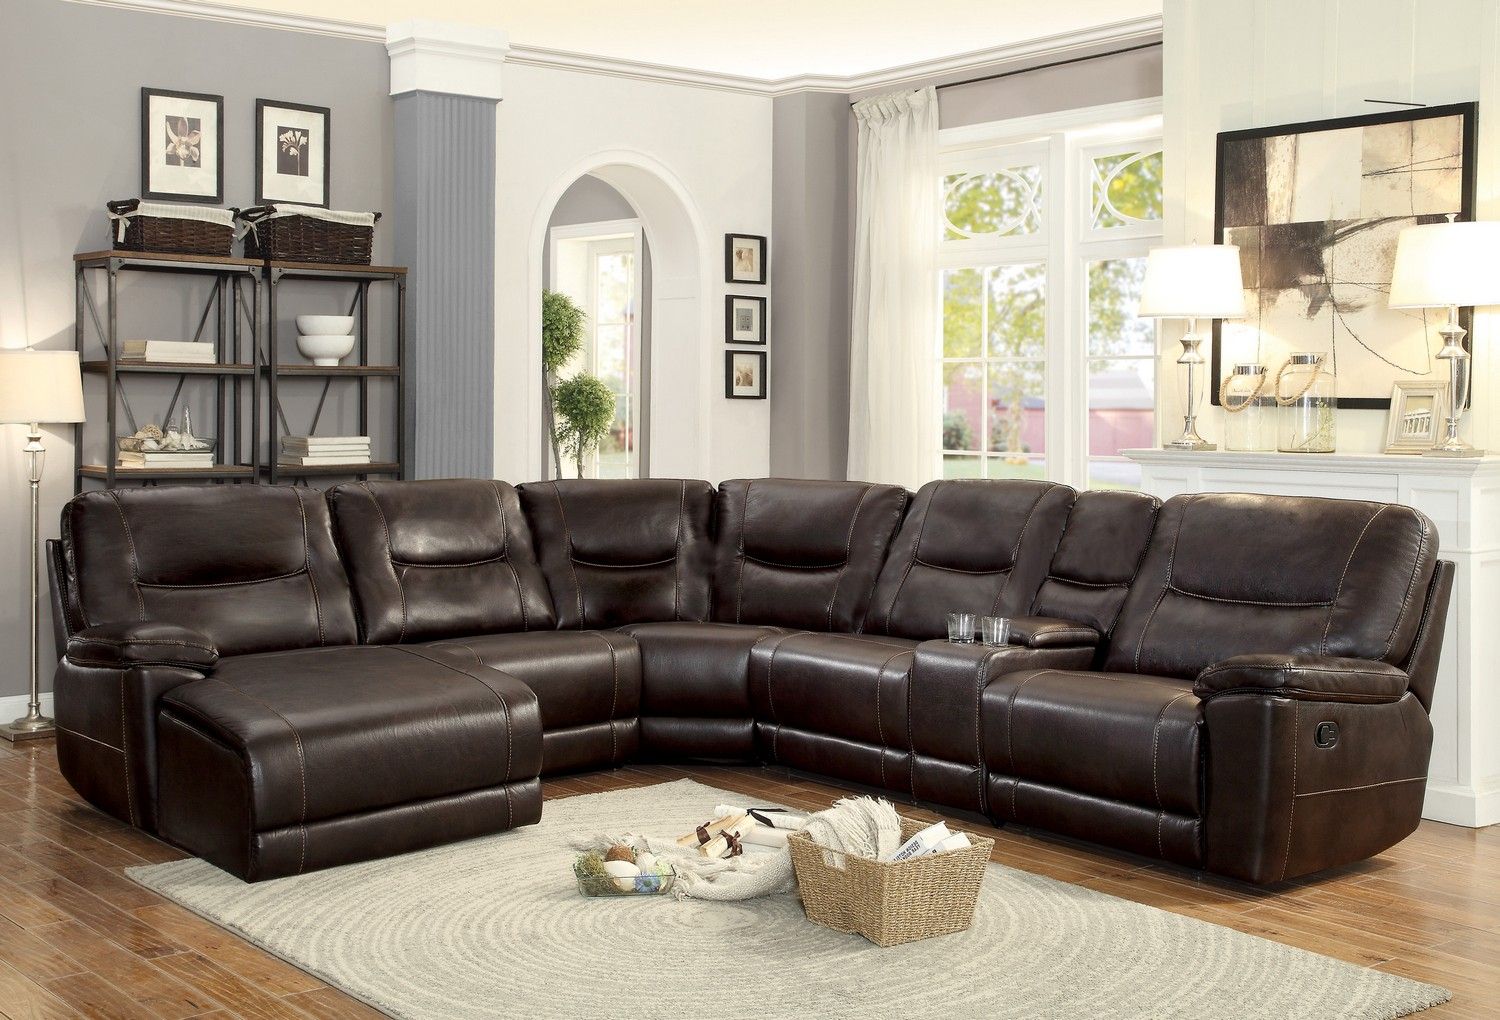 Homelegance Columbus Reclining Sectional Sofa Set B – Breathable Faux In Faux Leather Sofas In Dark Brown (Gallery 2 of 20)